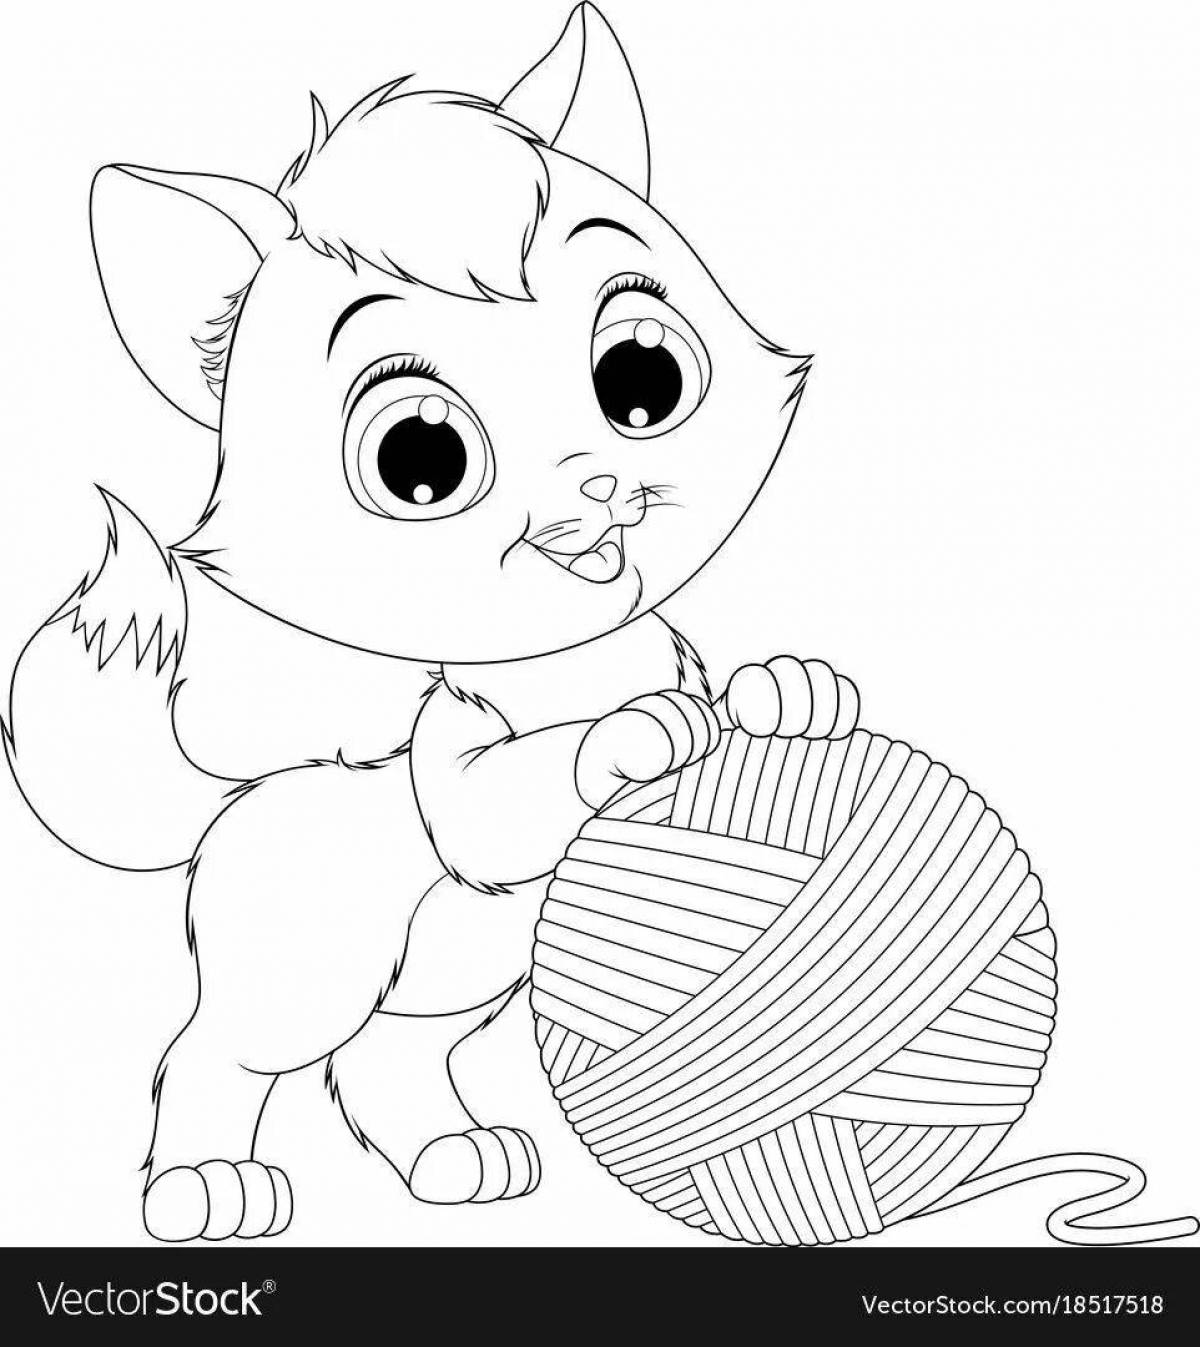 Adorable kitten with a ball coloring book